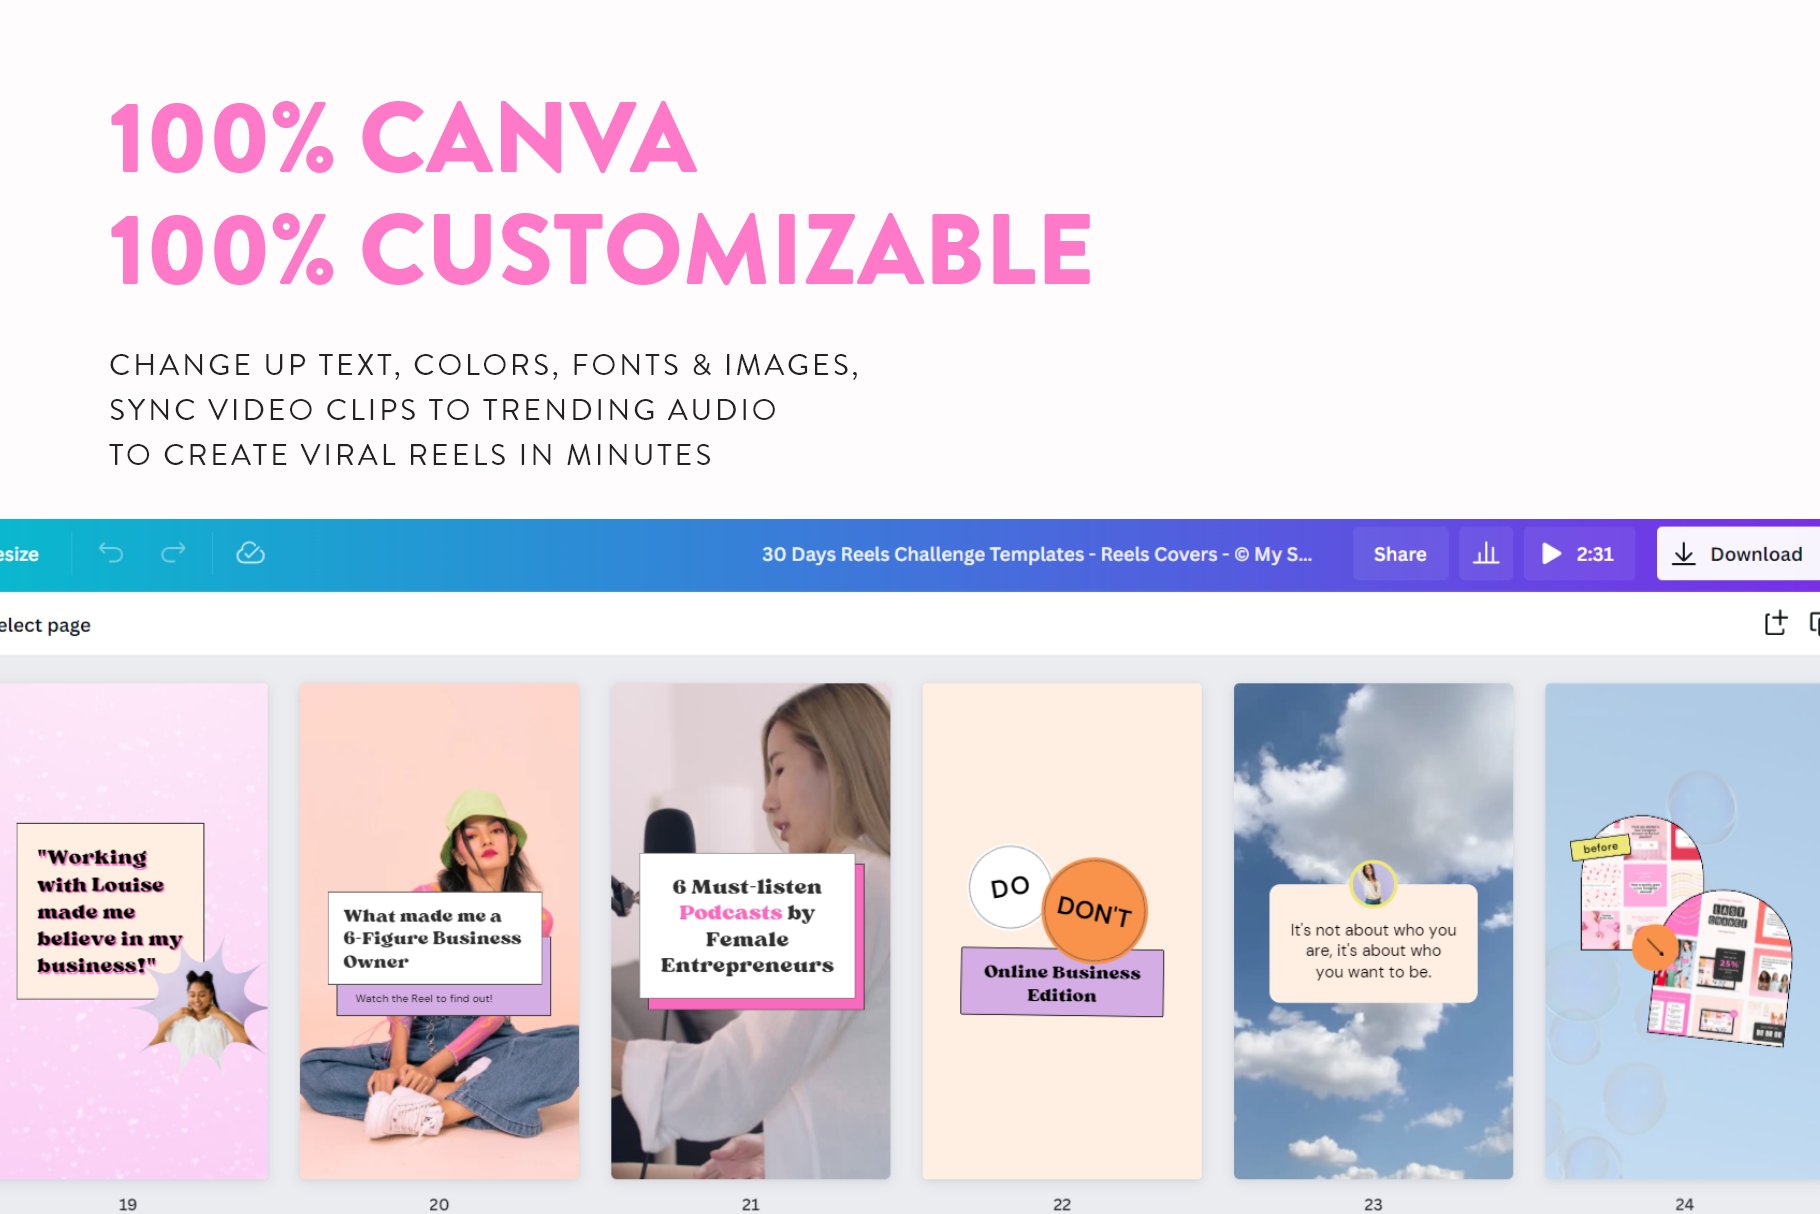 instagram reels challenge templates for canva customizable 6 cm 678